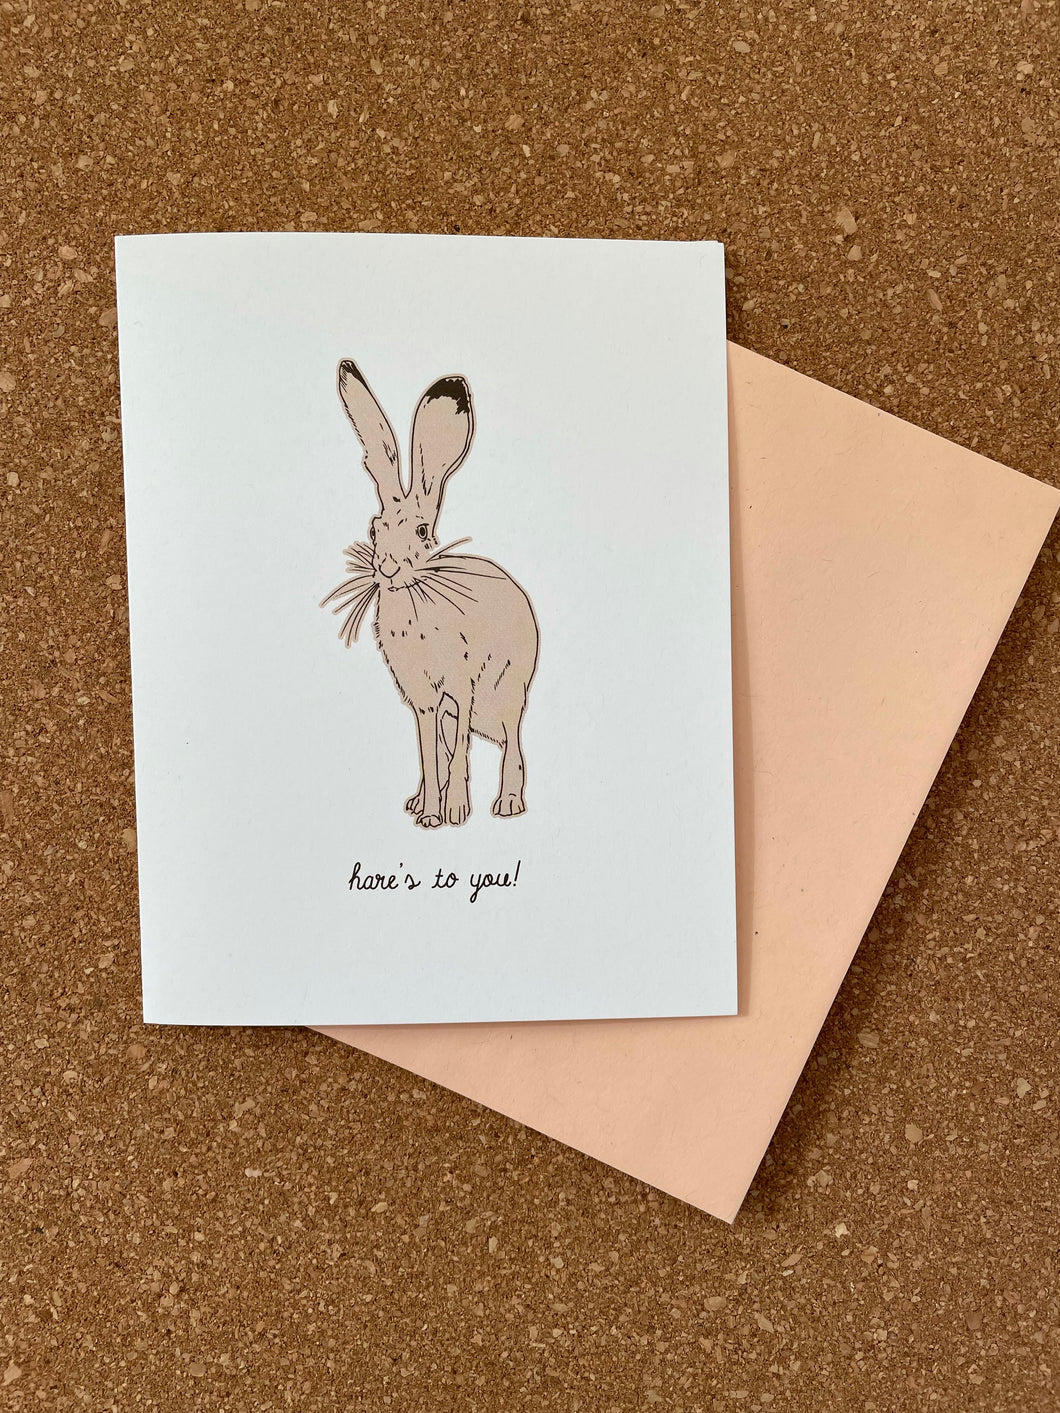 Desert Hare Greeting Card - hare's to you!